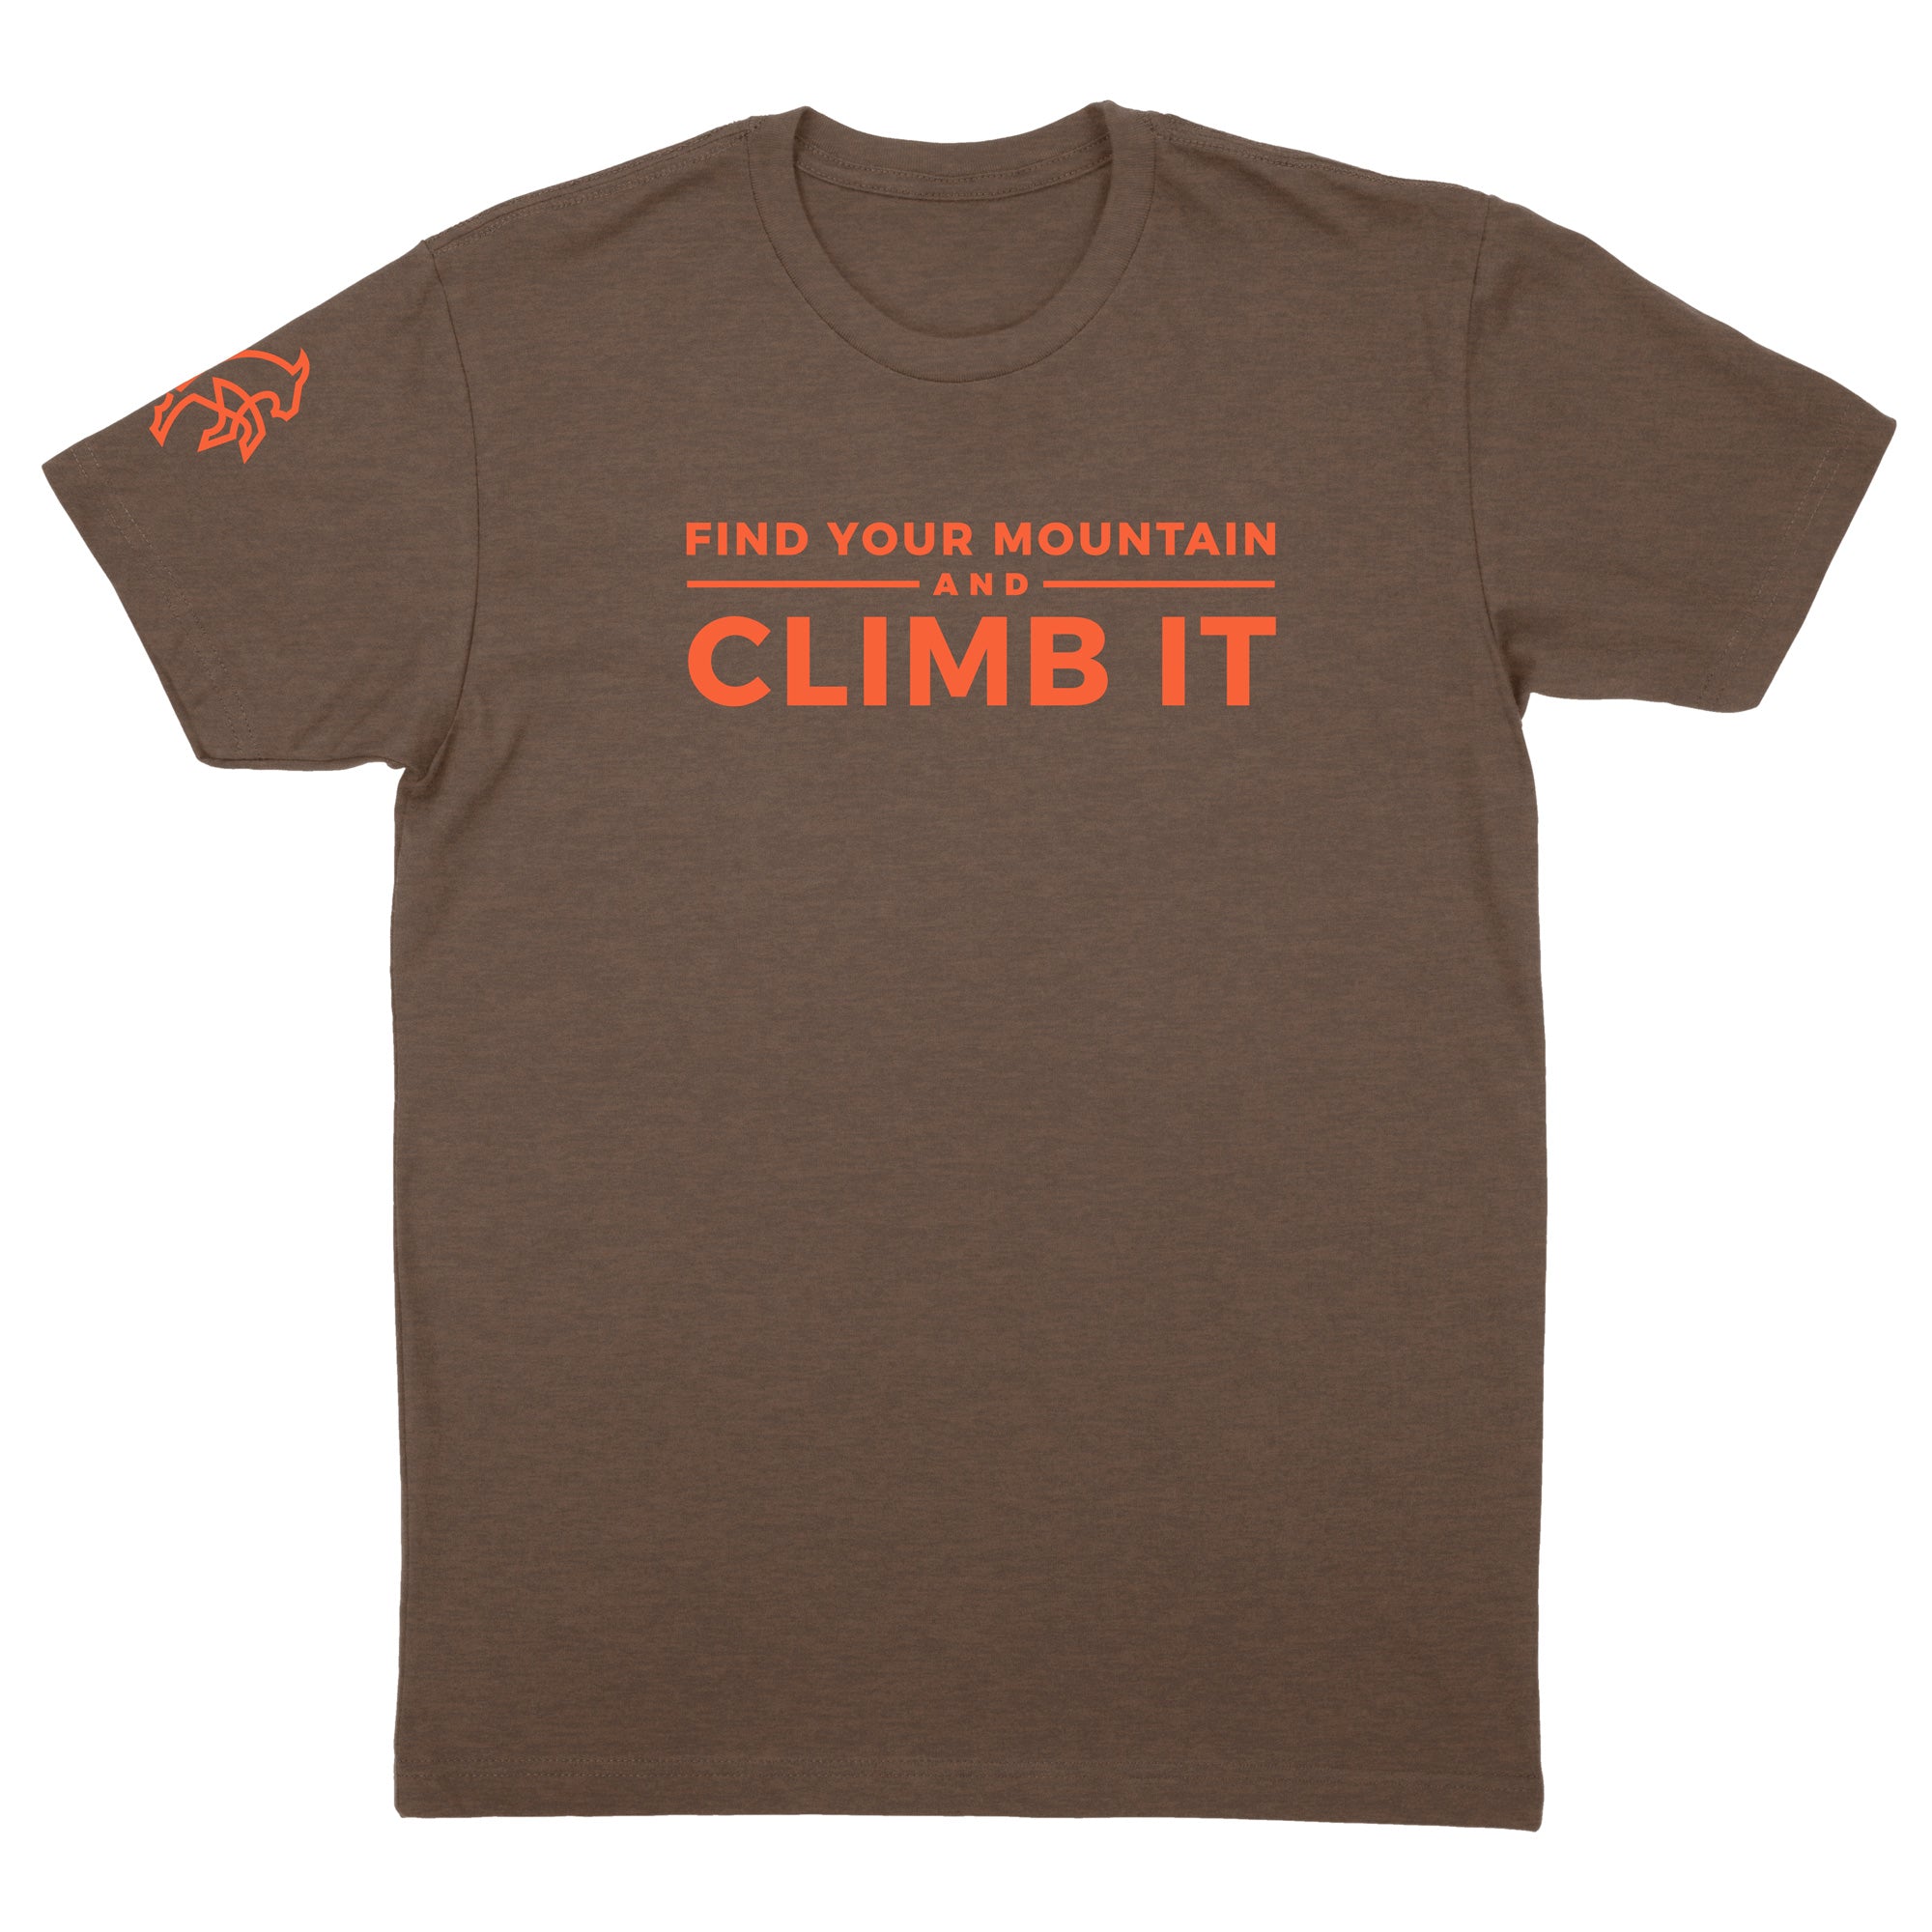 Find Your Mountain and Climb It -- Mens Tee